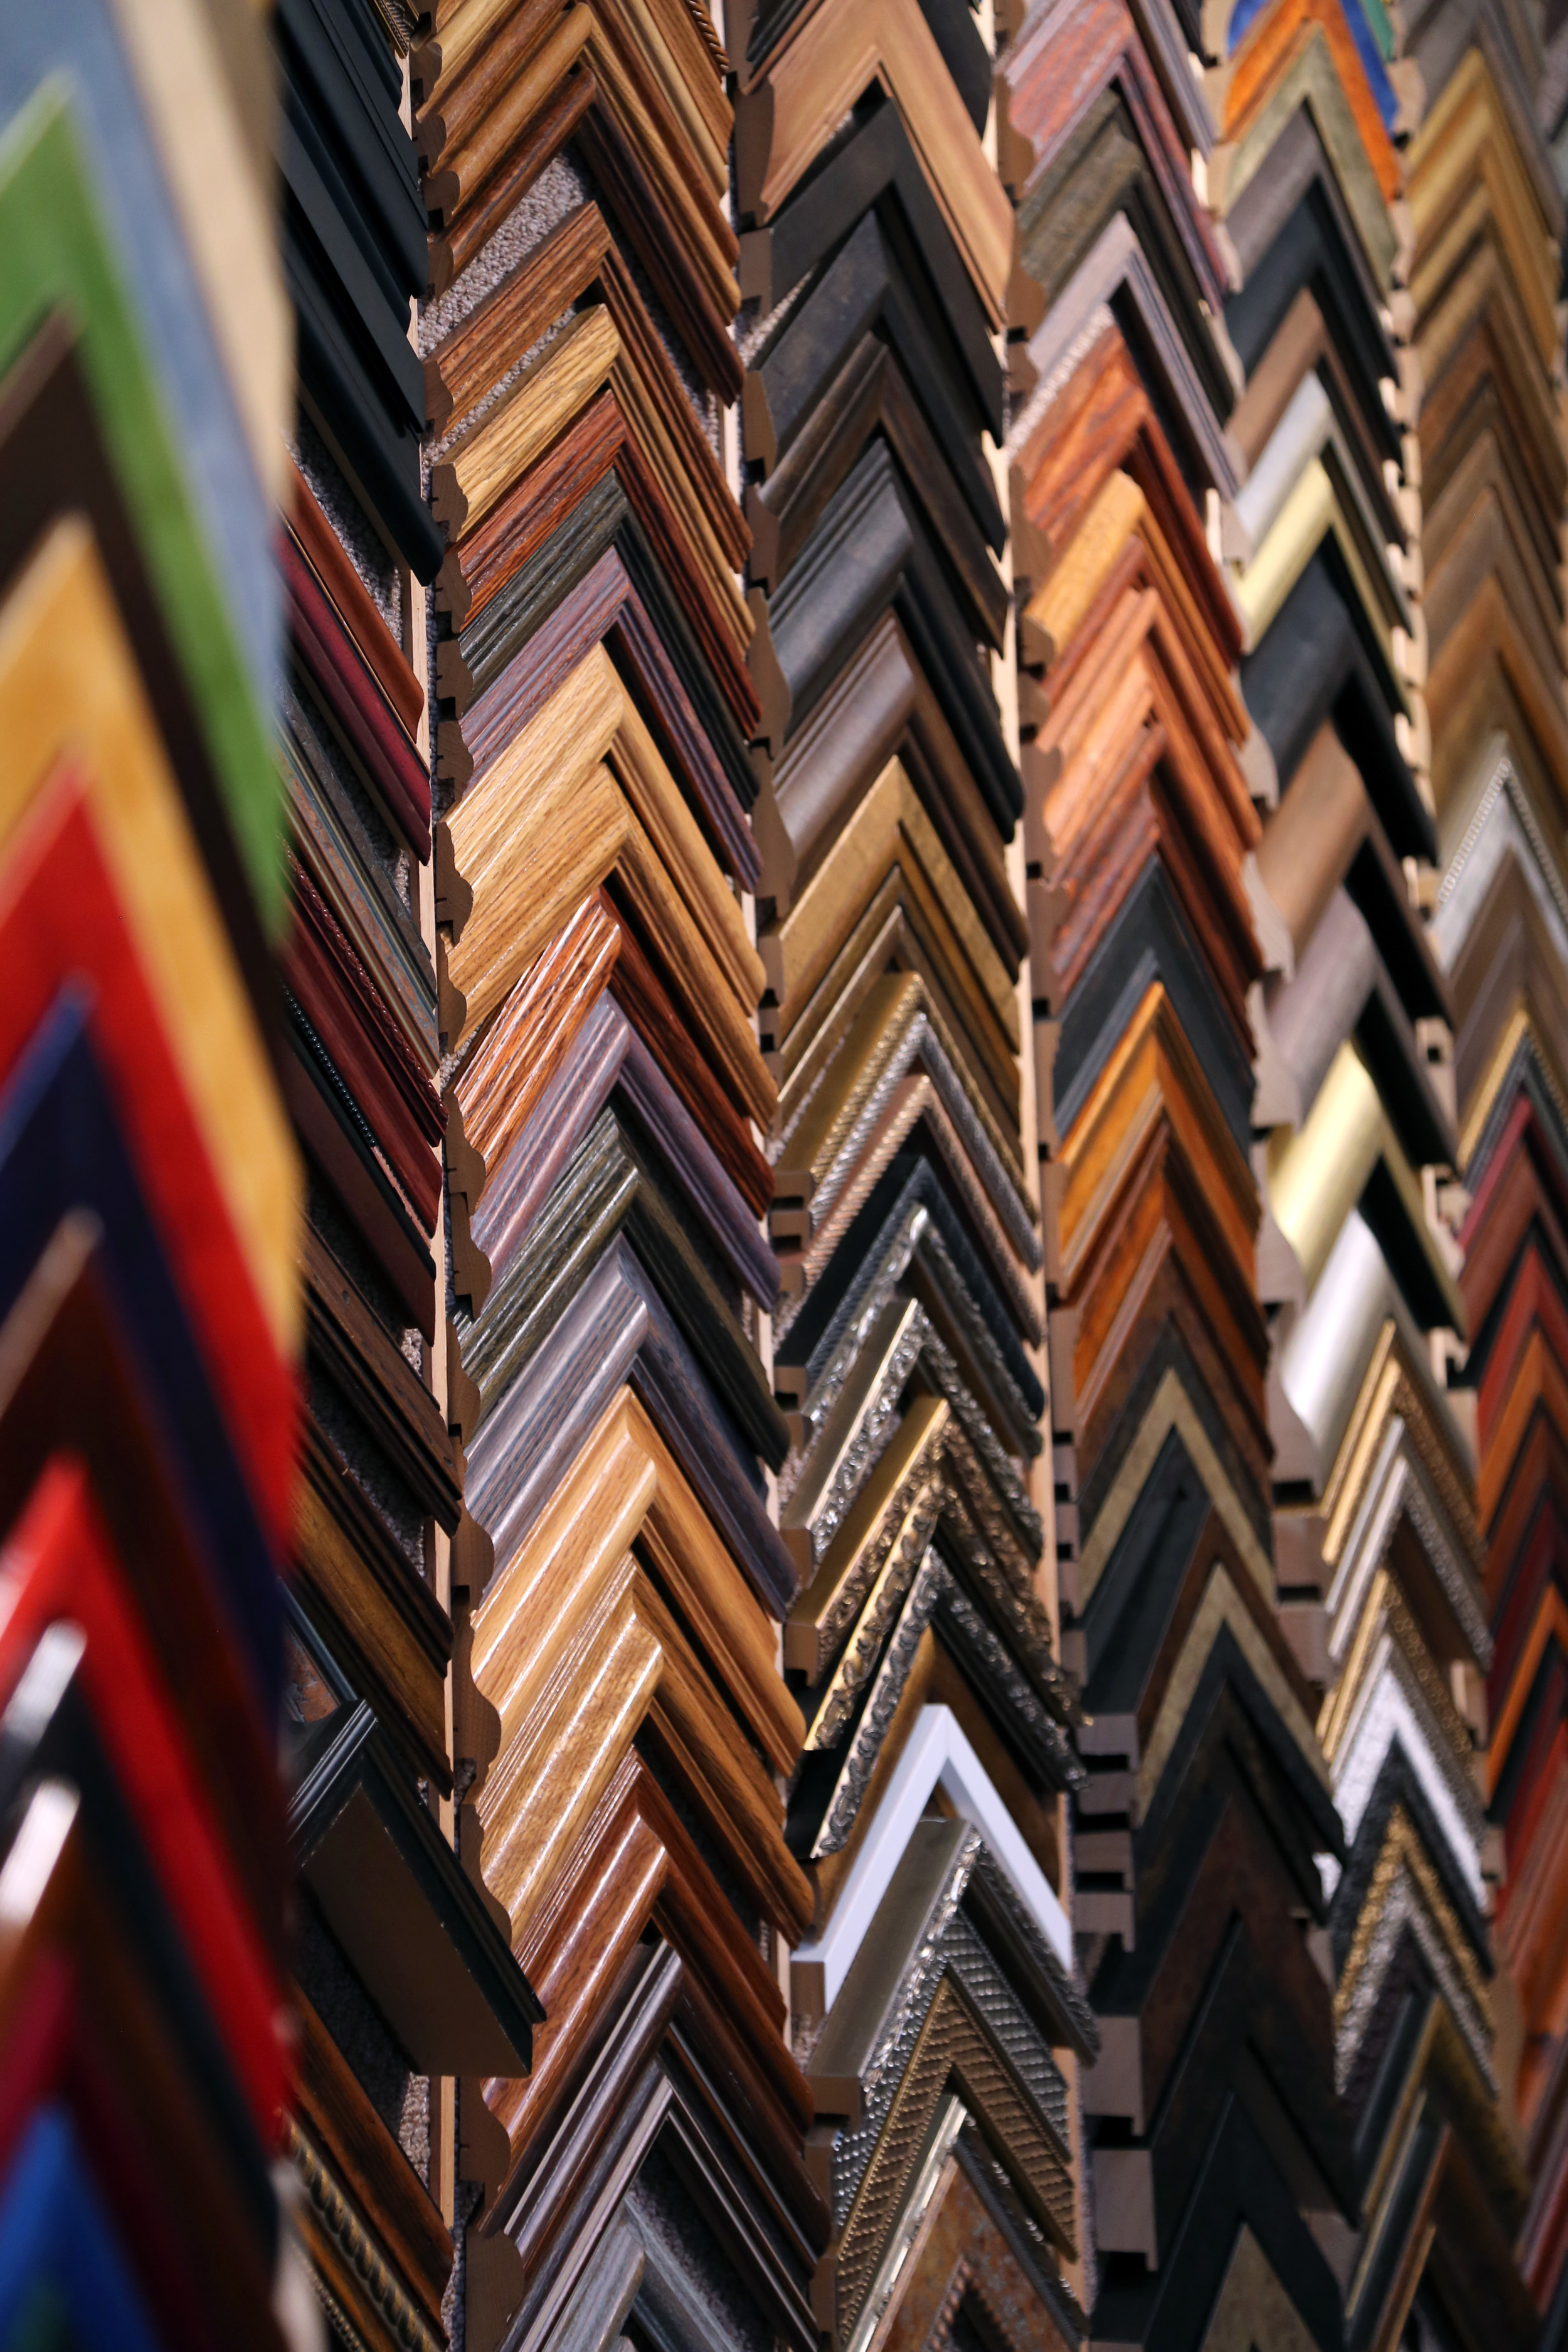 Choosing The Perfect Matboard Color For Your Custom Framing Project